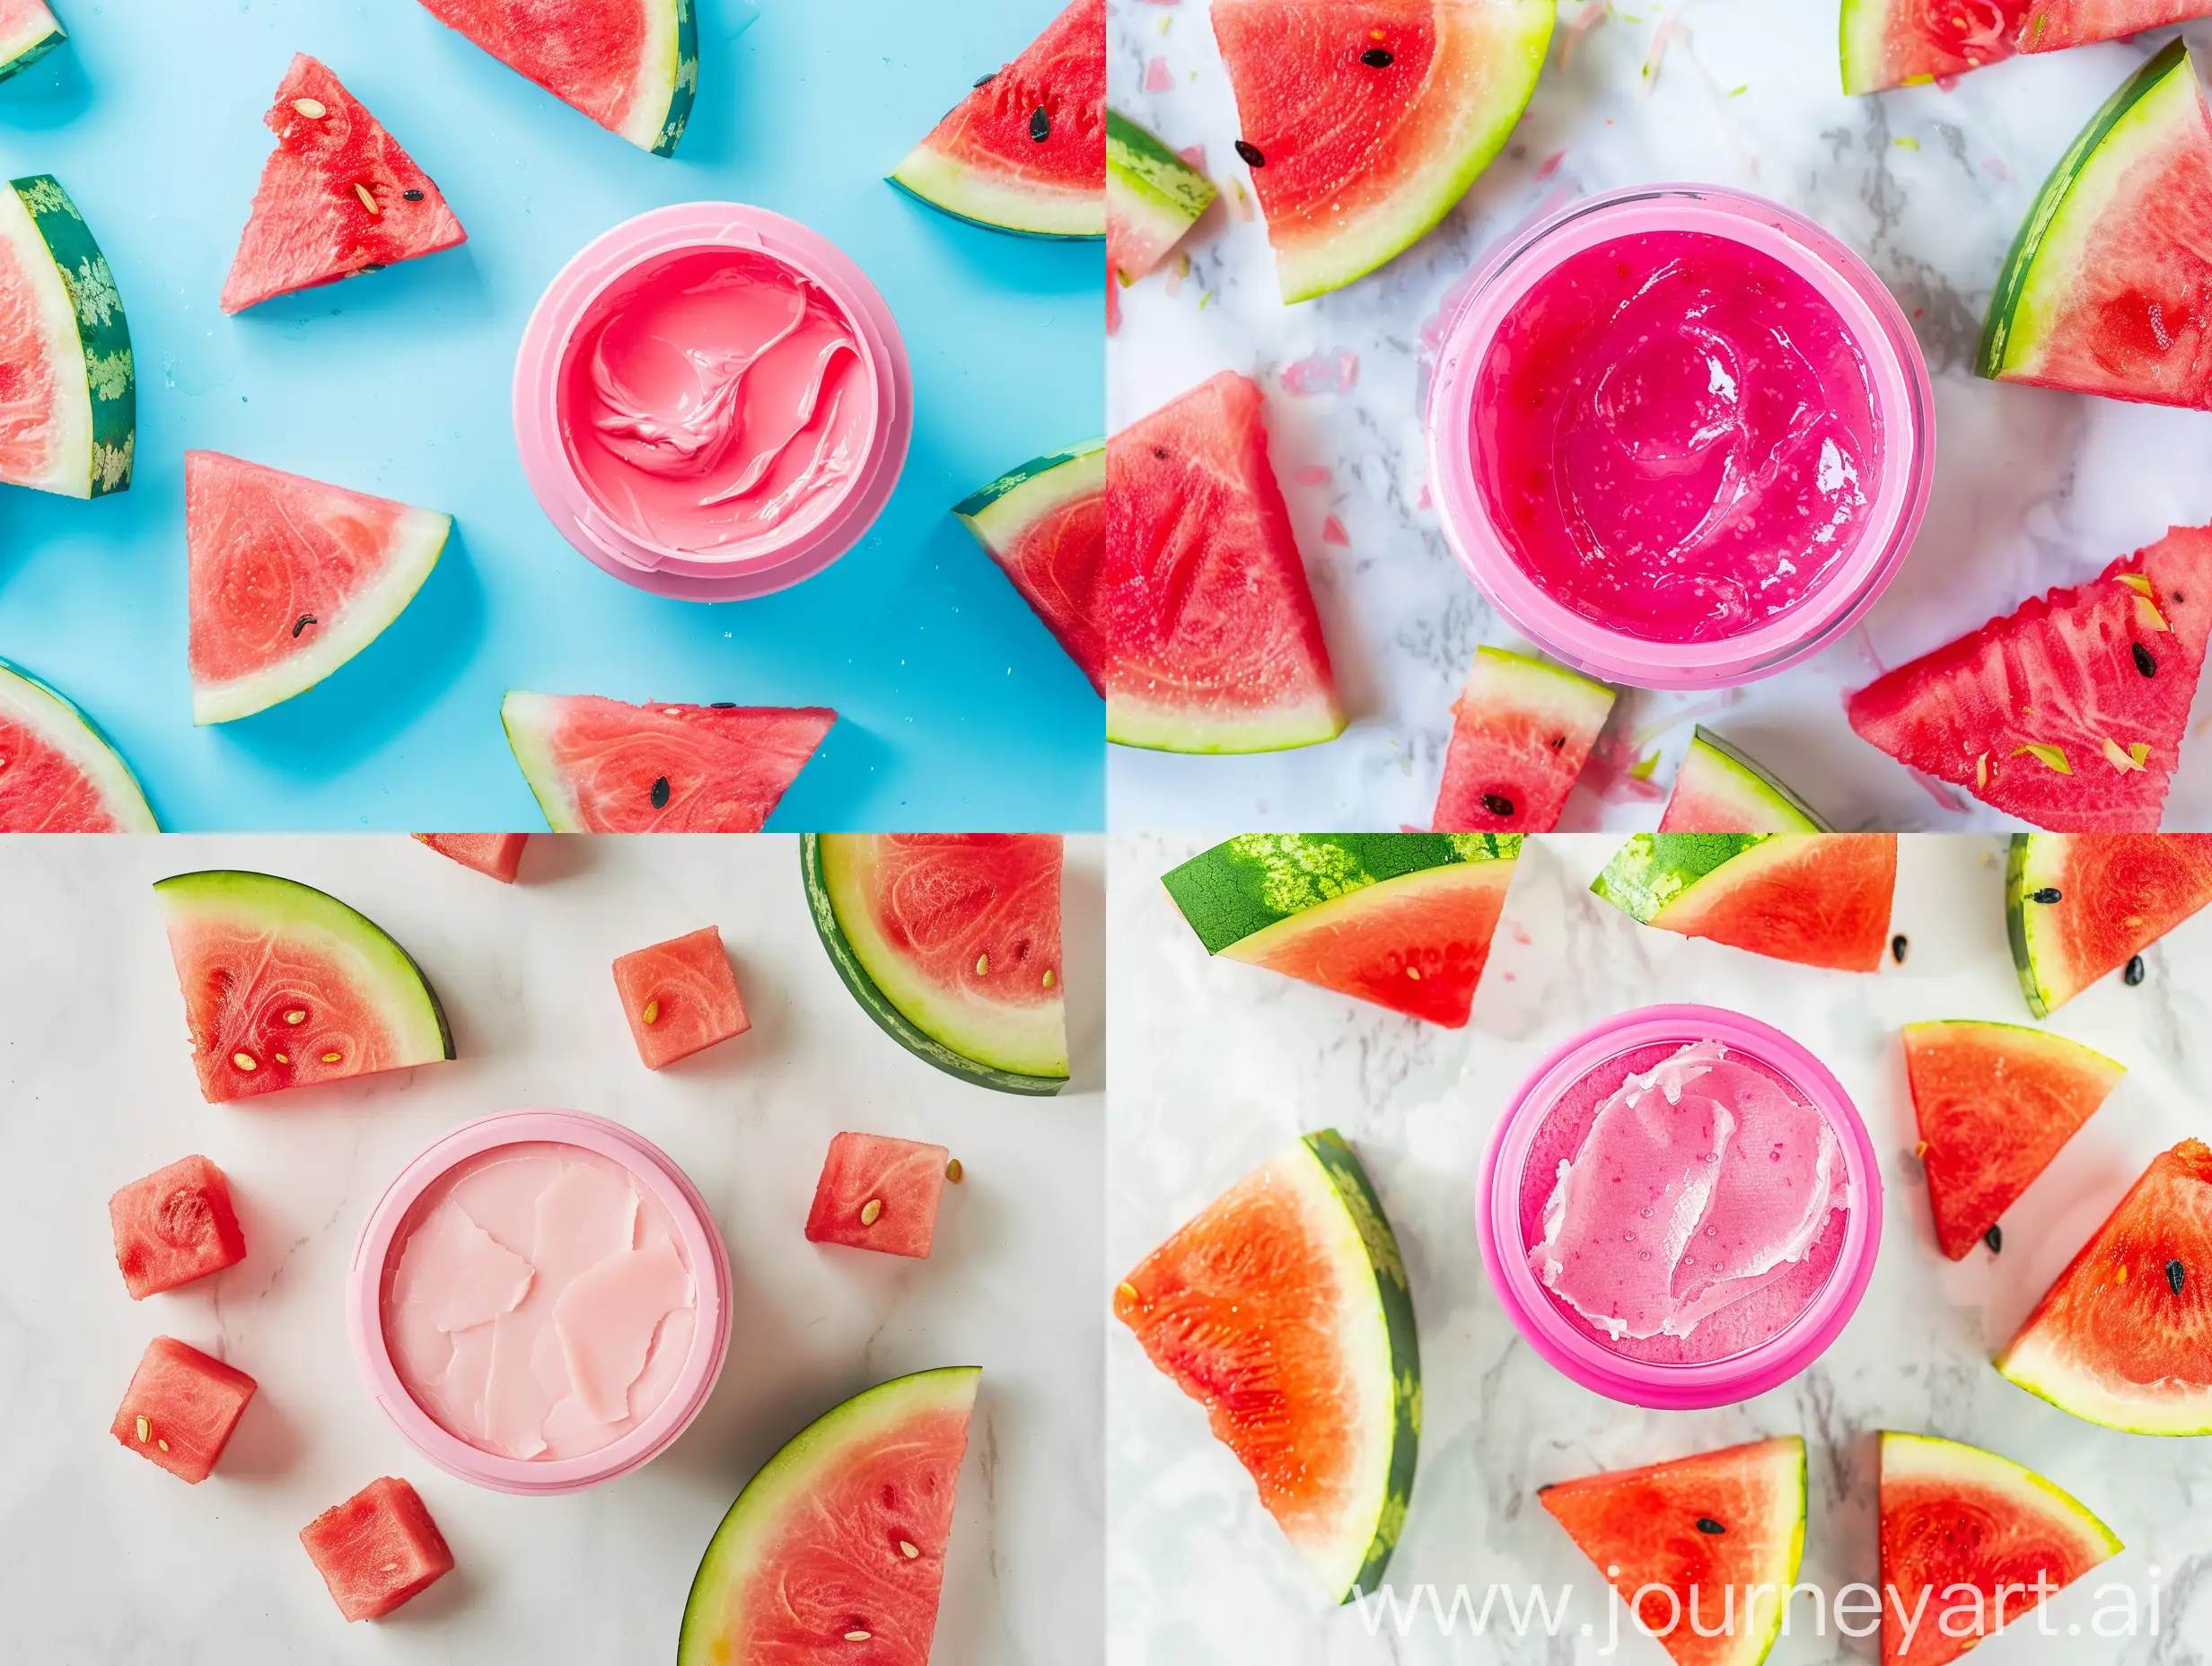 Promotional photo of a pink face mask container next to pieces of watermelon